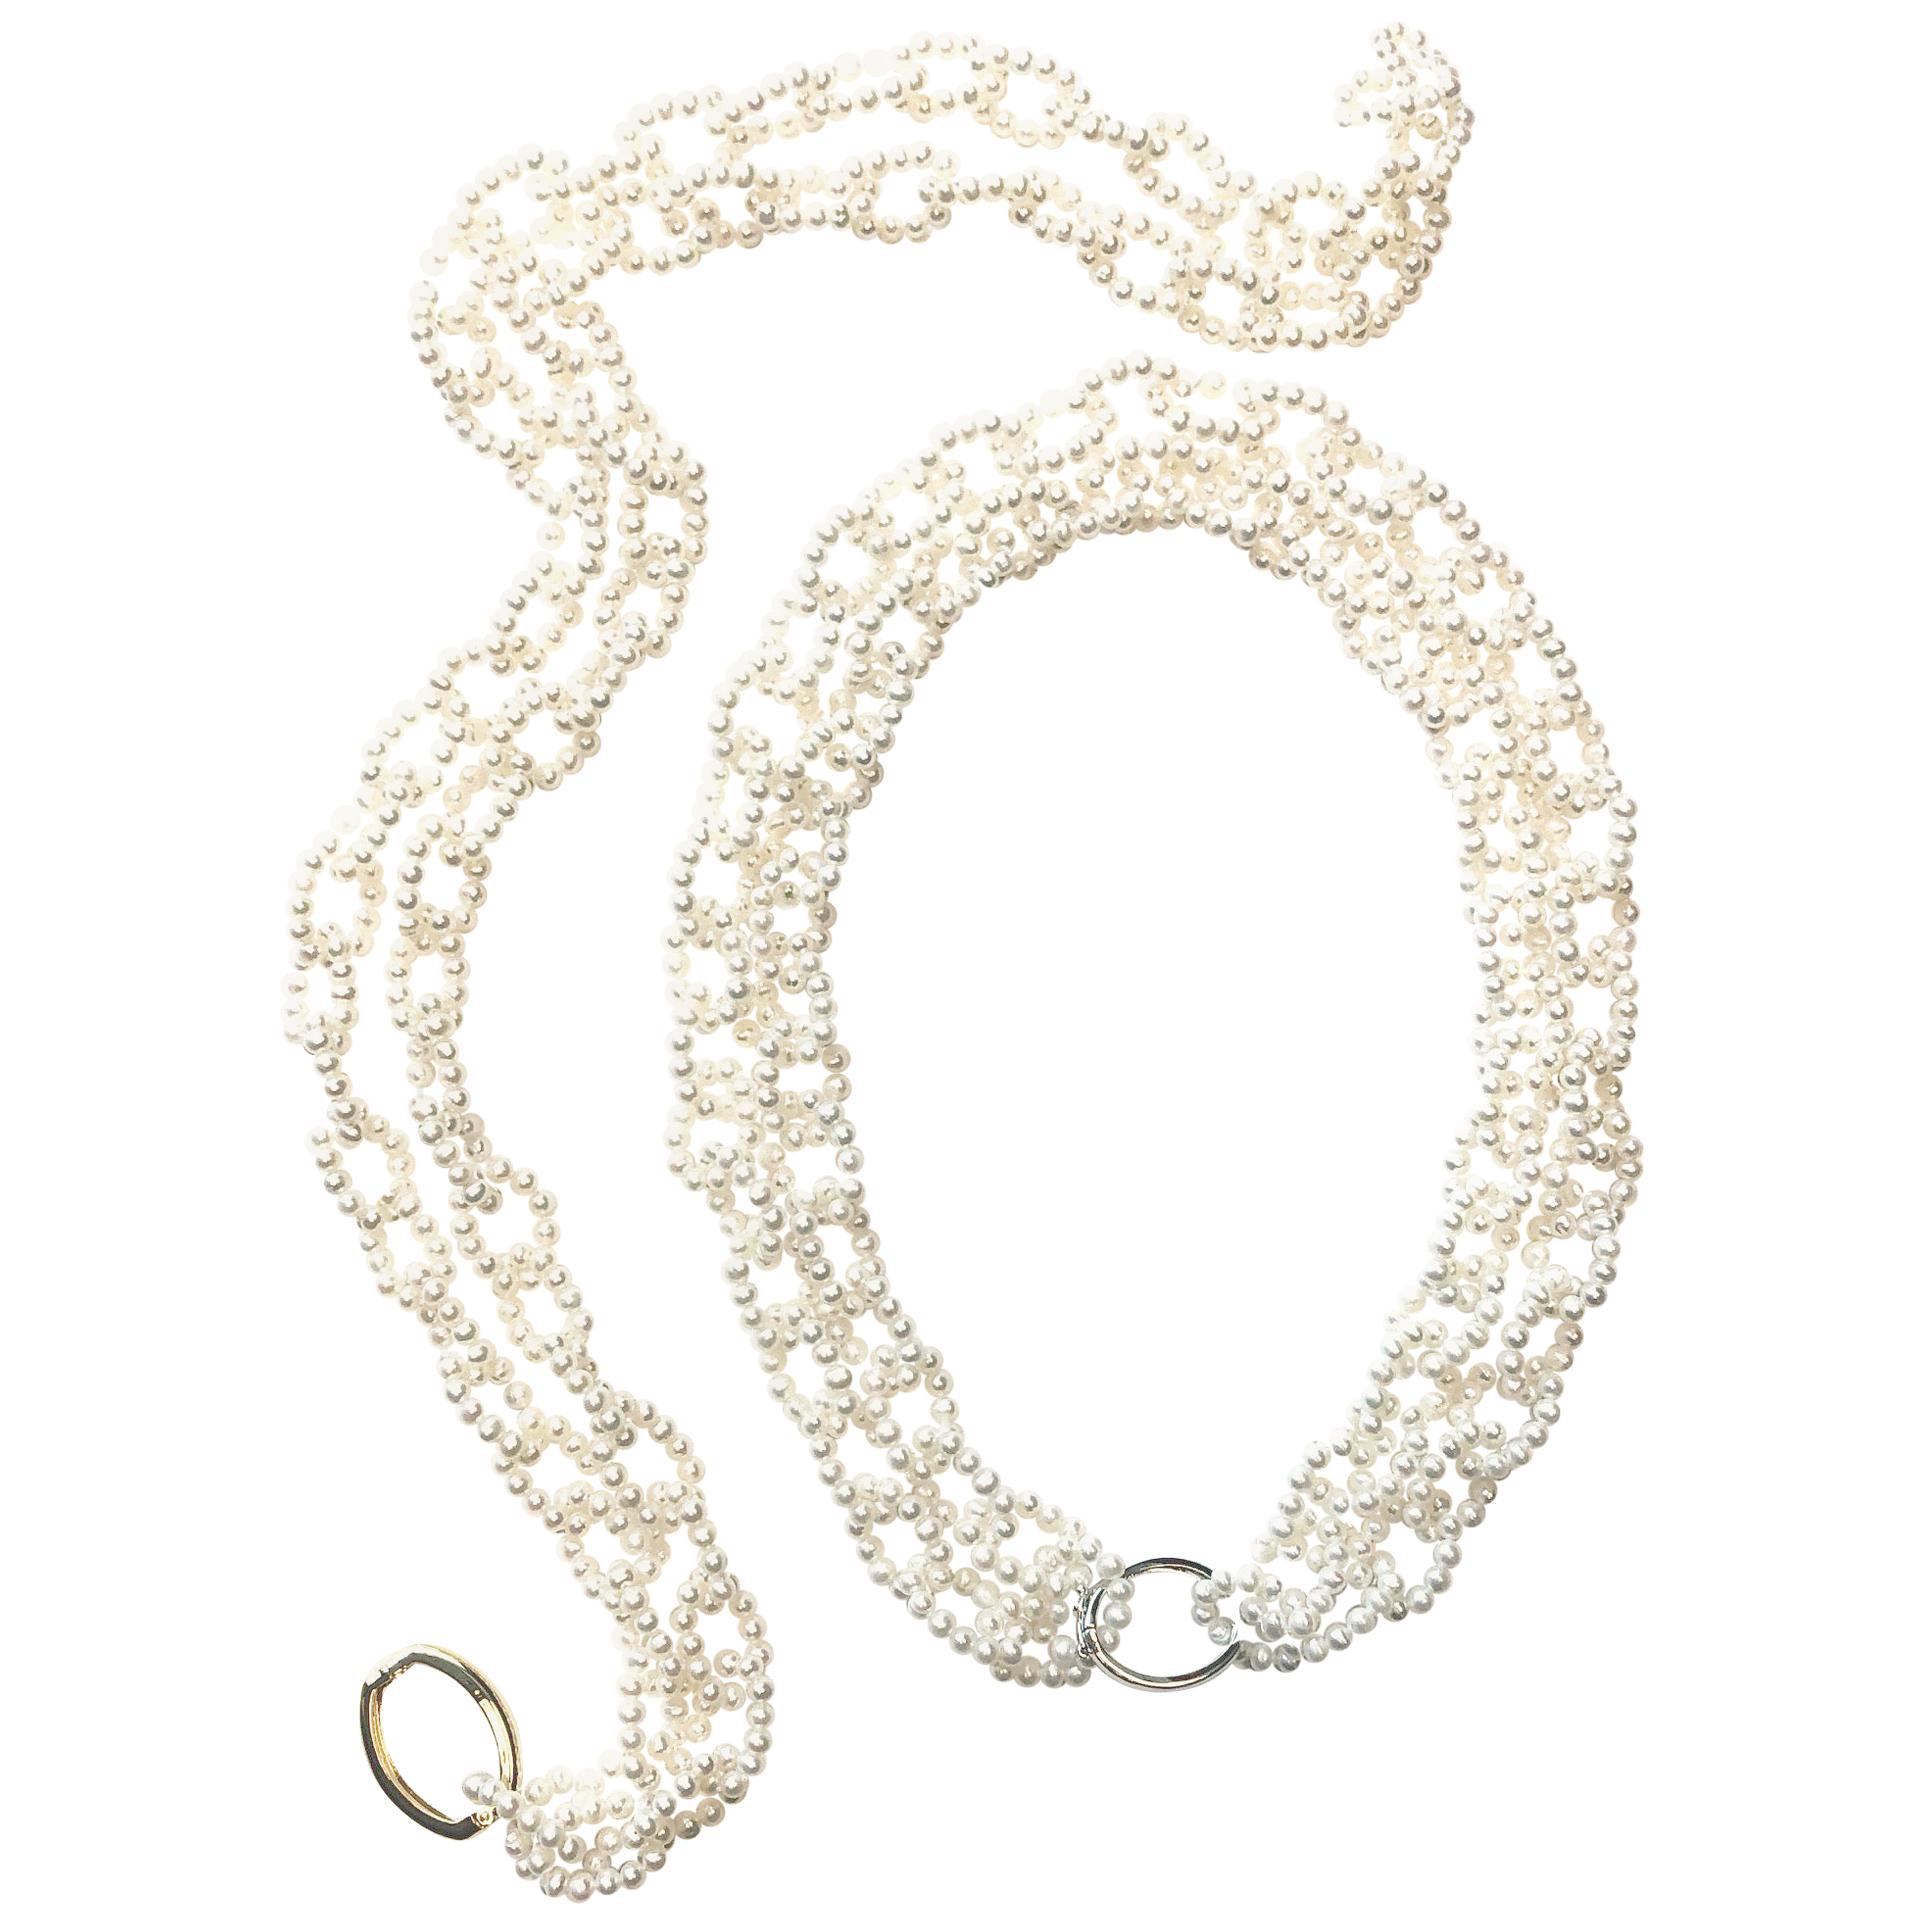 36-Inch White Pearl "Open Chain Link" Necklace with Silver Toned Clasp